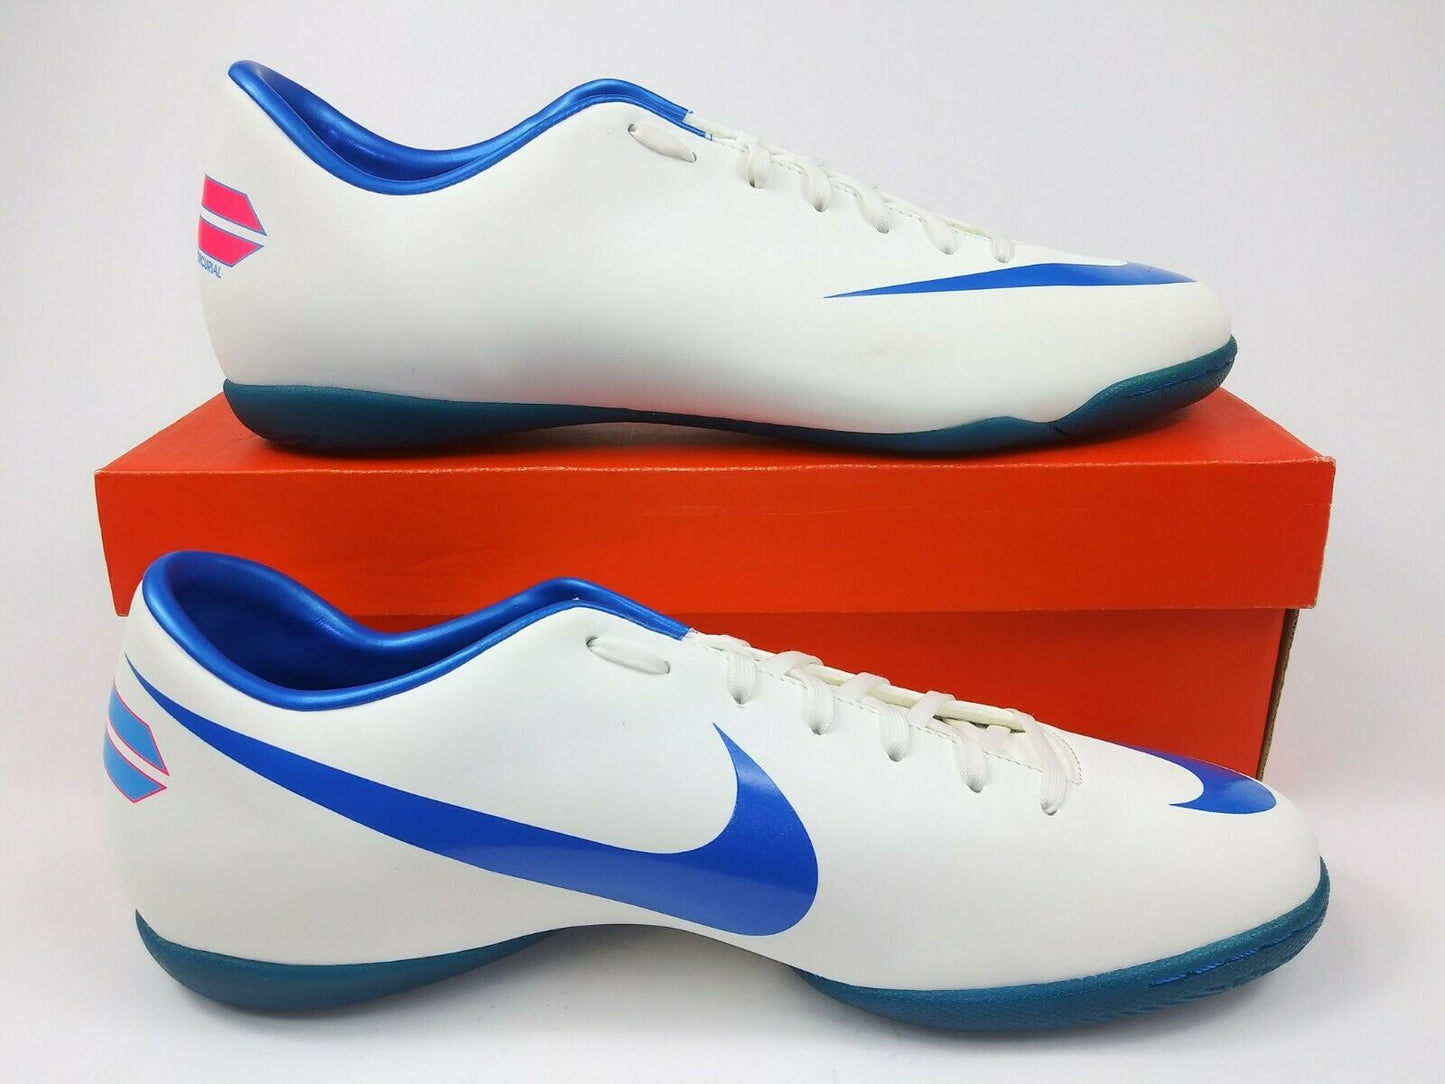 Nike Mercurial Victory lll IC White Blue Indoor Shoes